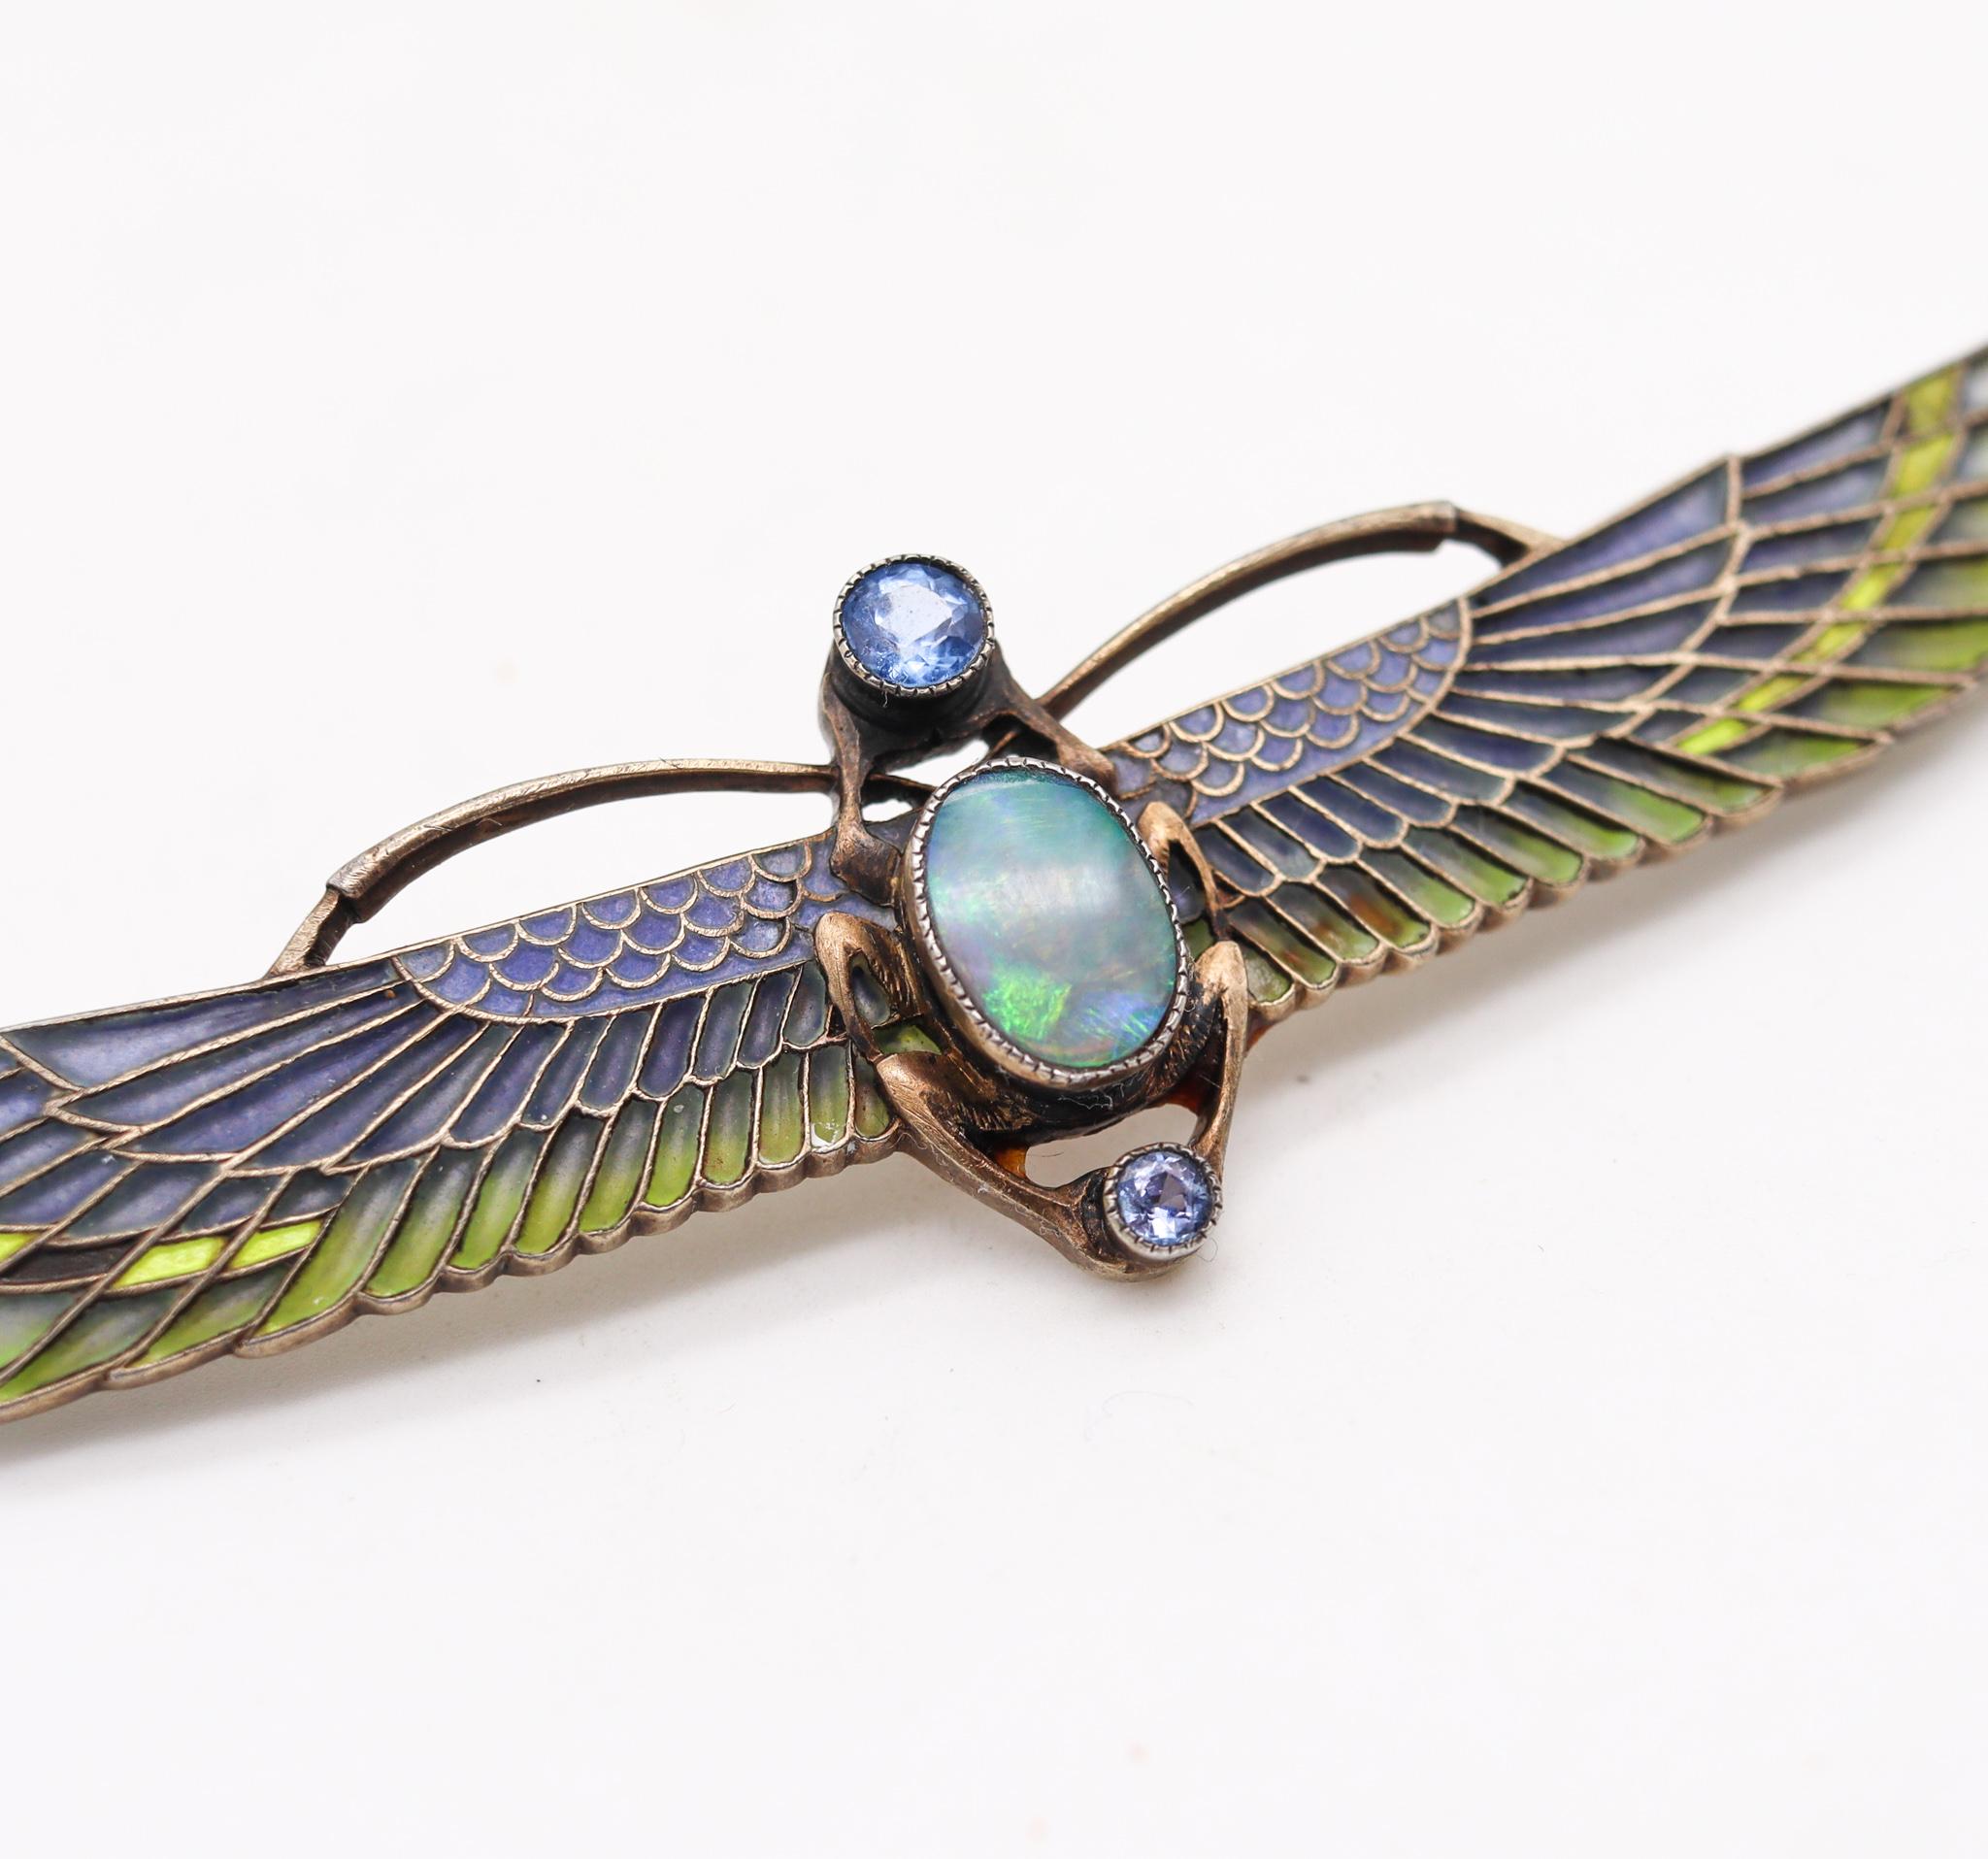 Austrian Egyptian revival Plique à Jour winged Scarab brooch

An exceptional elongated brooch, created in Austria during the art nouveau period, back in the 1915. This magnifique piece has been carefully crafted with the egyptian revival style, in